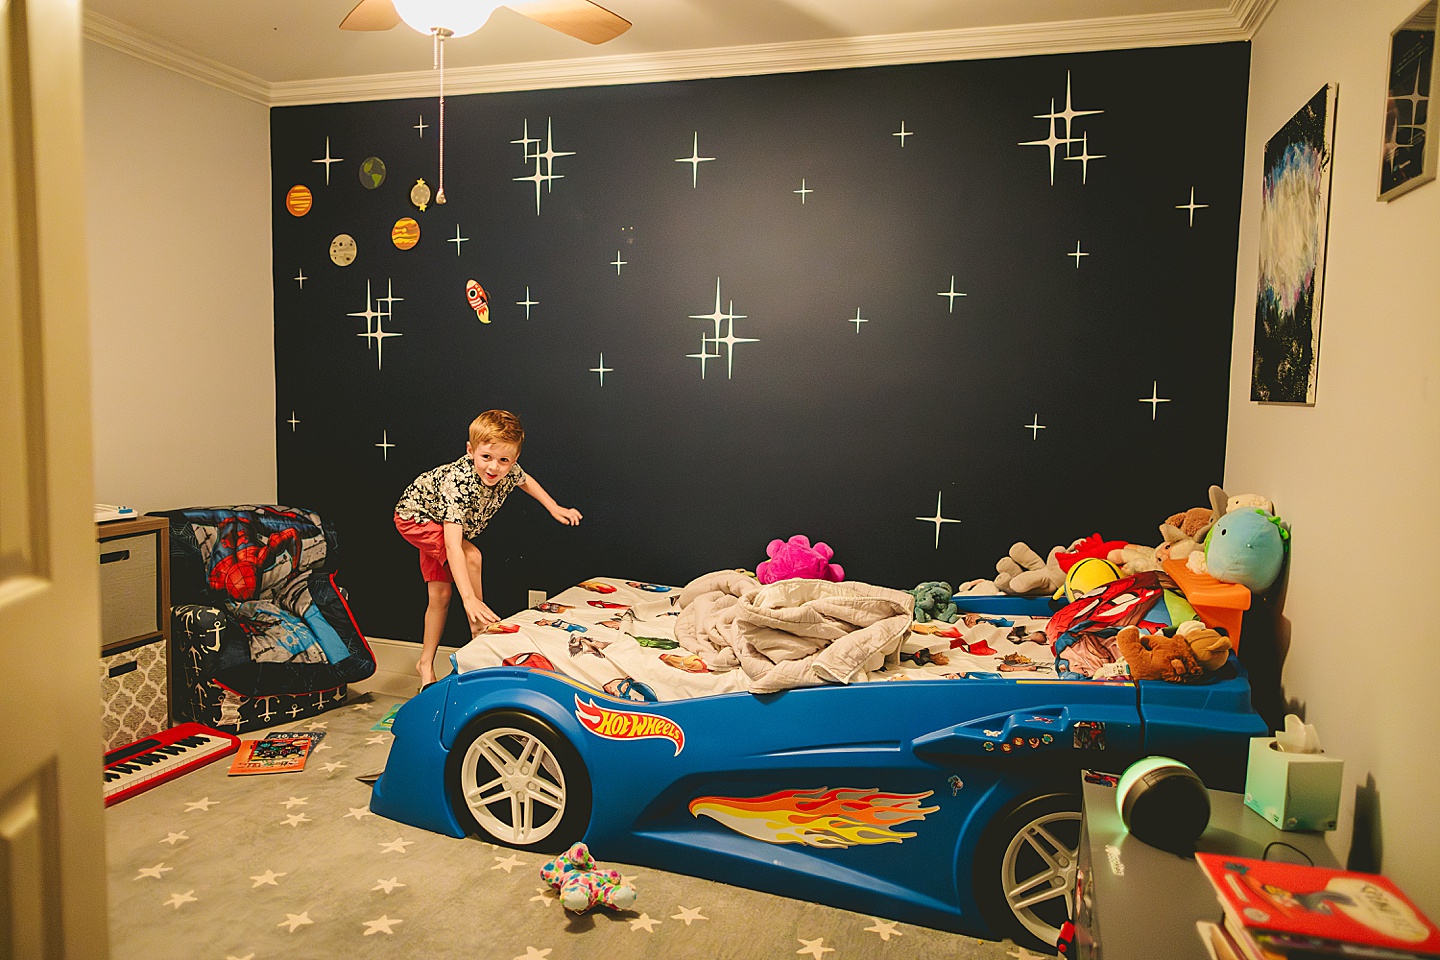 Kid hanging out in bedroom with race car bed